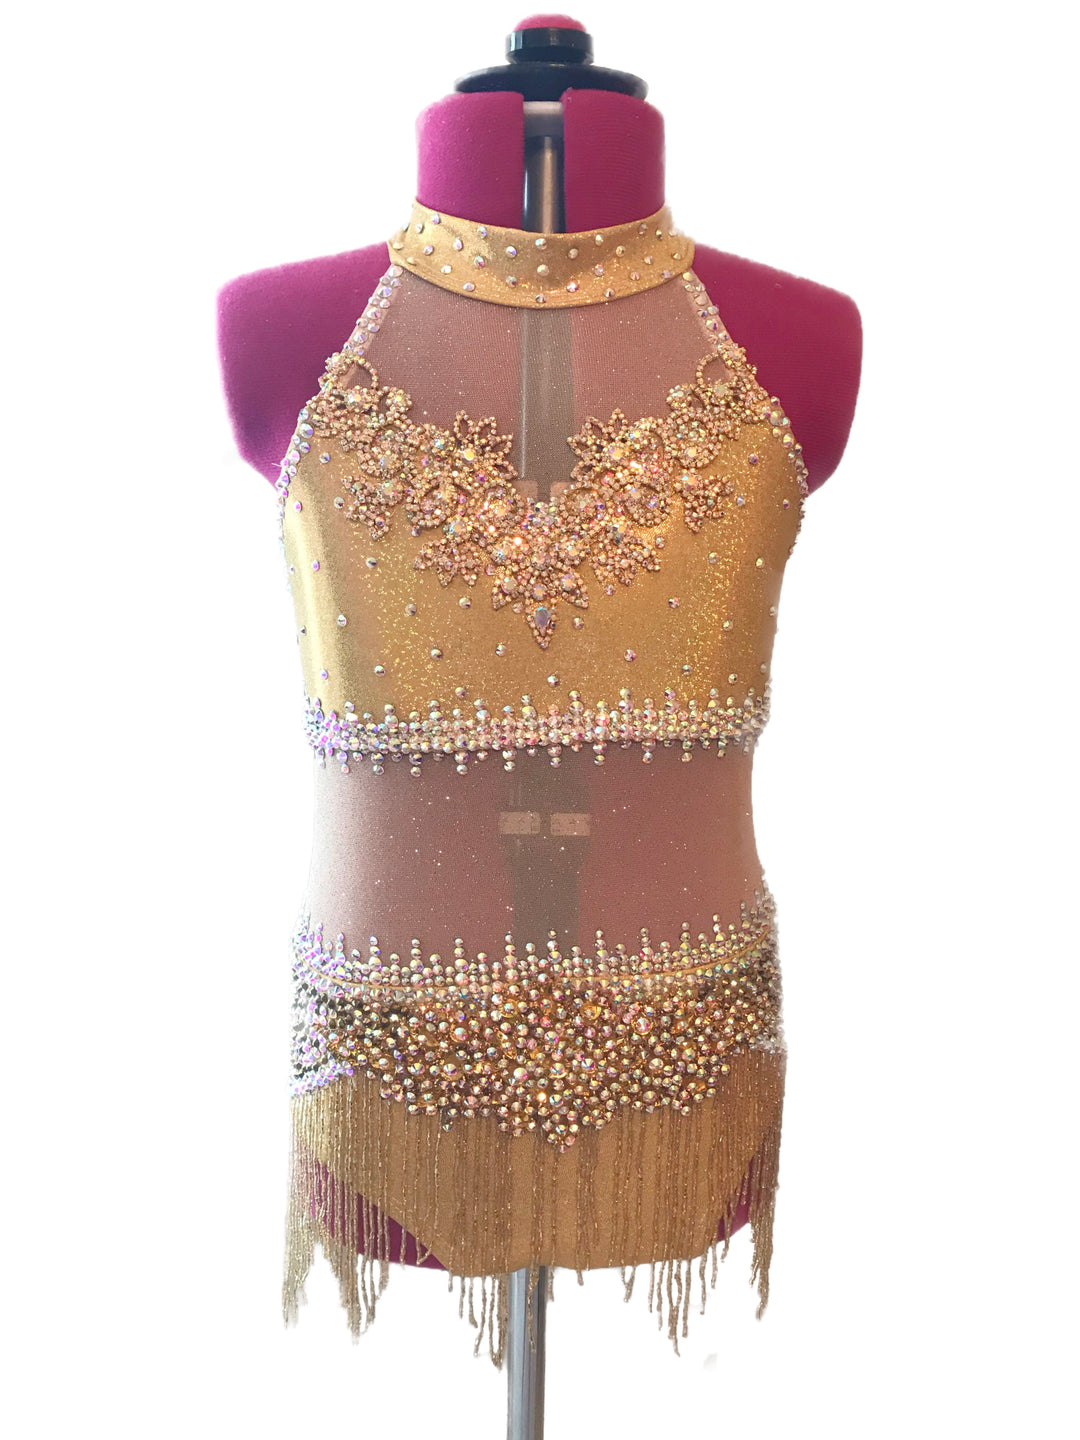 CHILD L/XL metallic gold jazz or musical theater competition dance costume